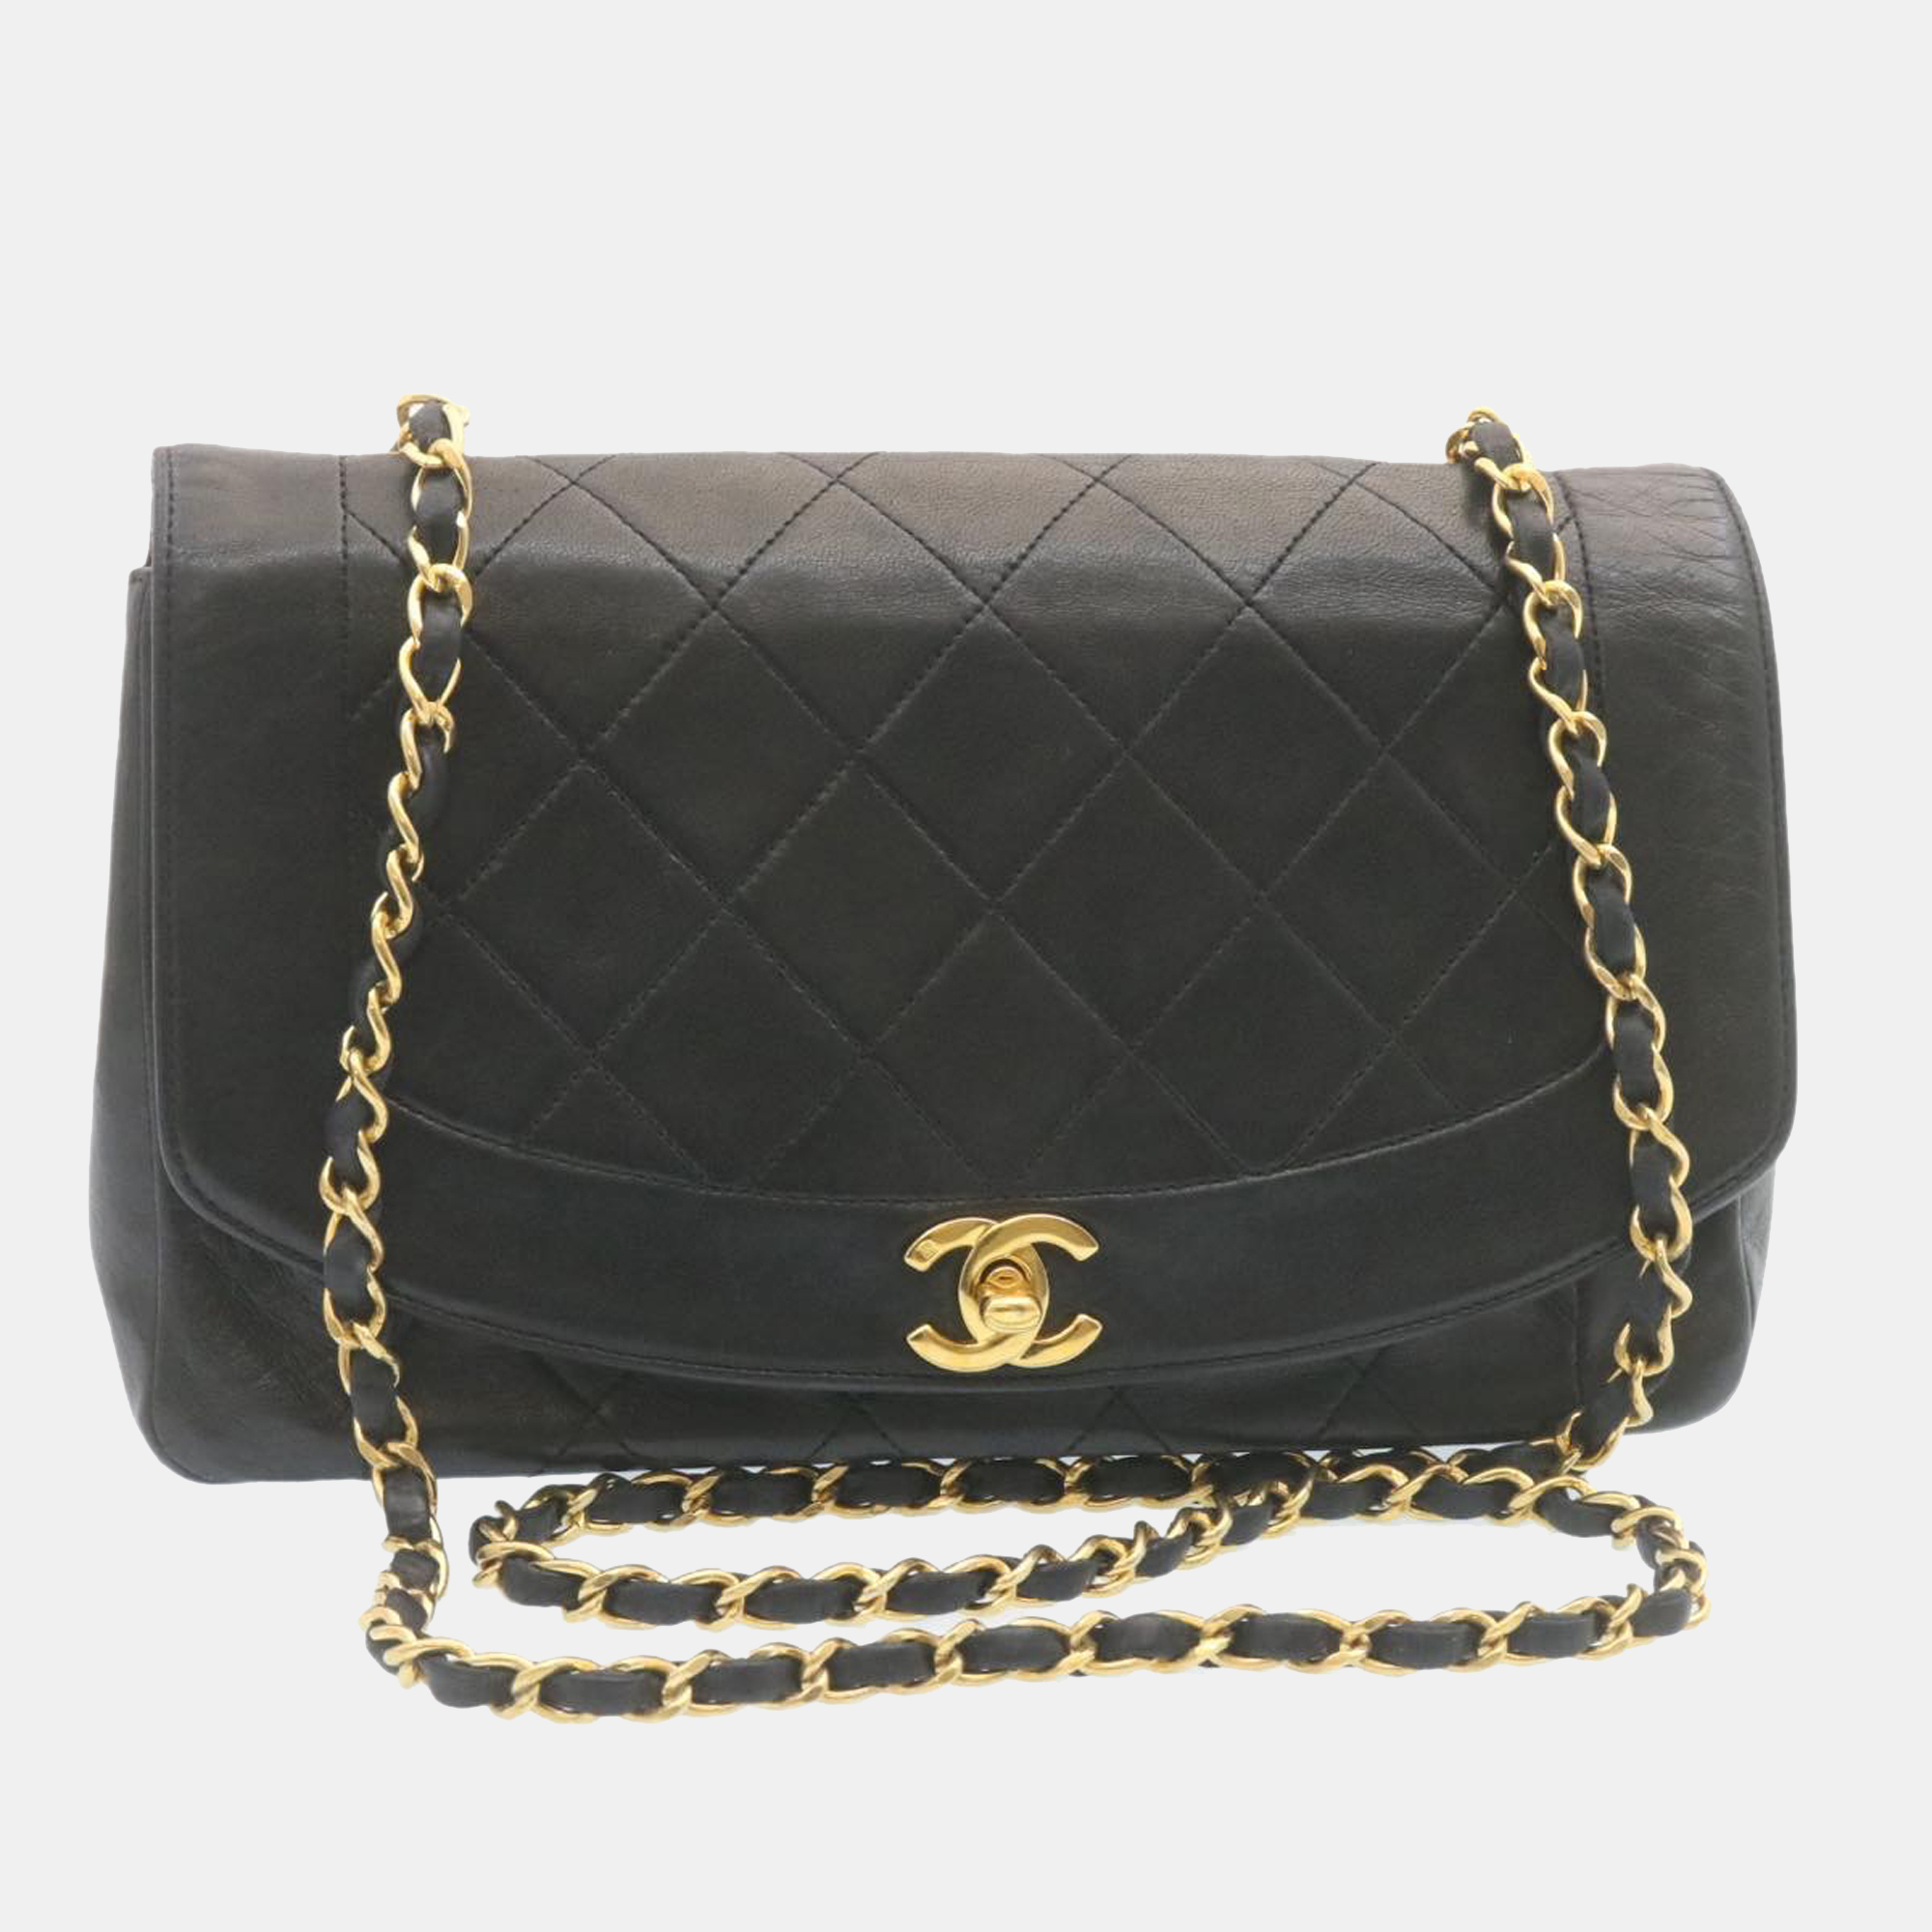 Pre-owned Chanel Black Leather Diana Flap Bag